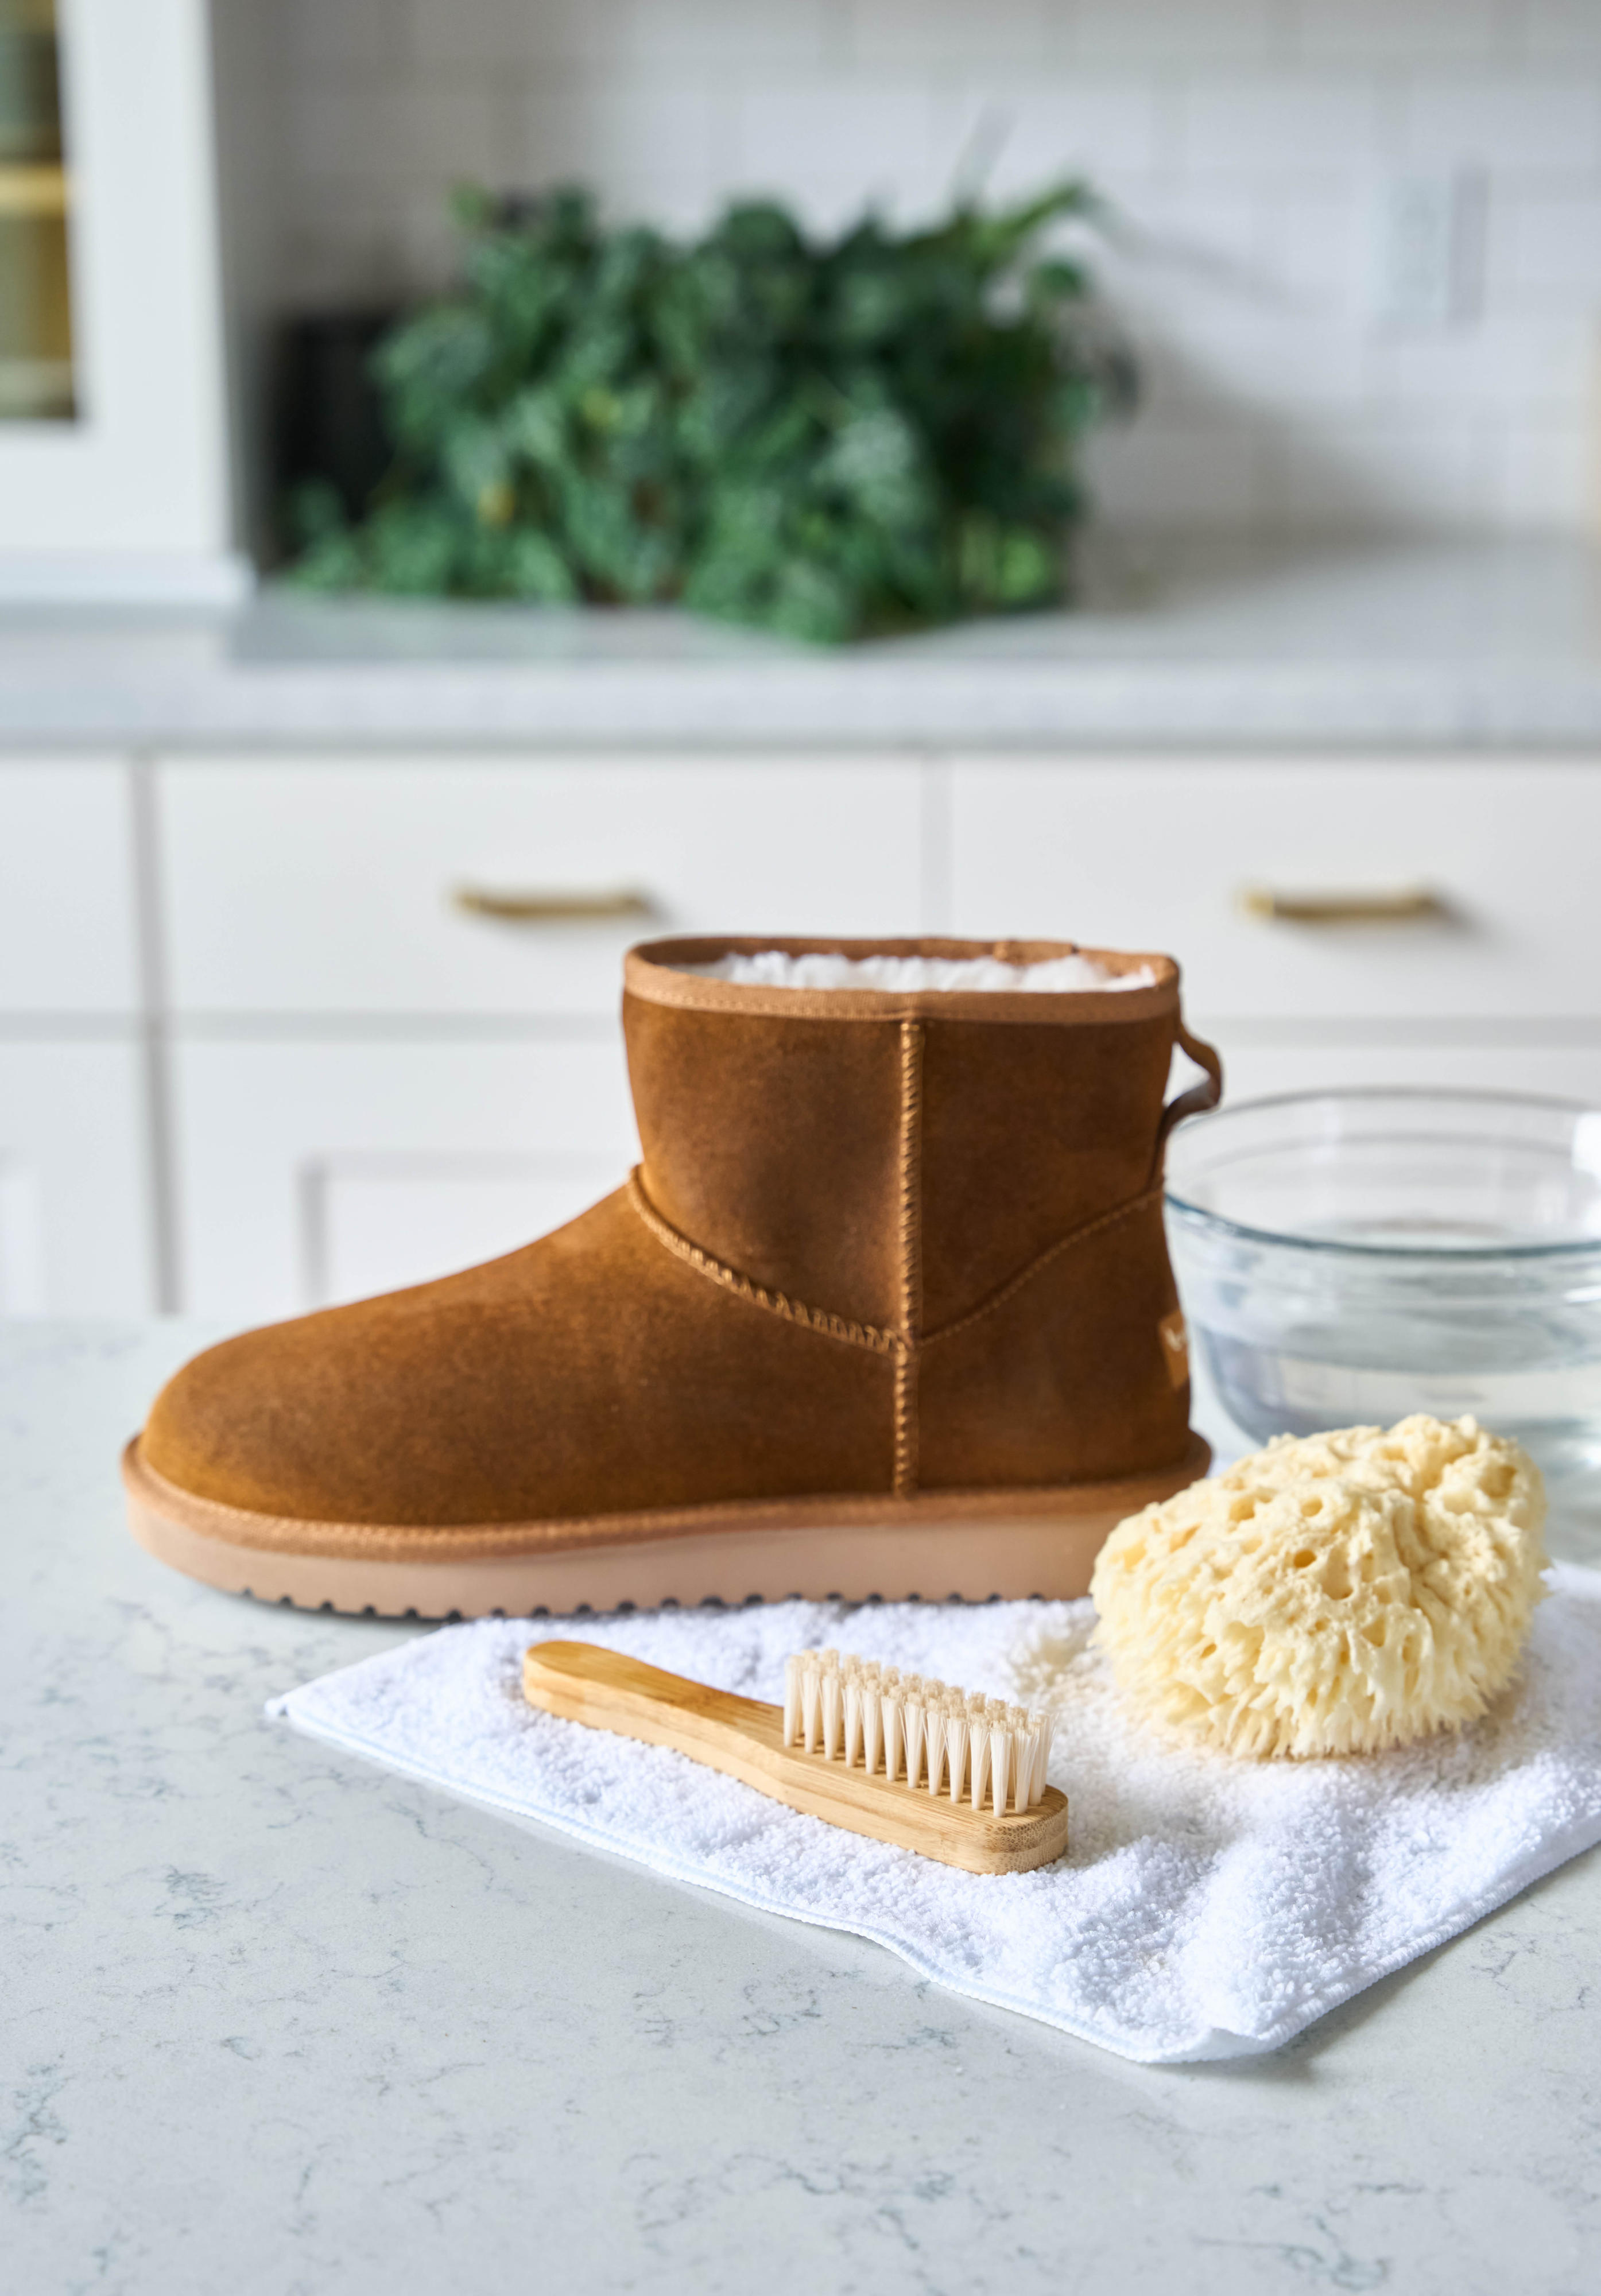 How to clean your make-up brushes & sponges - Boots